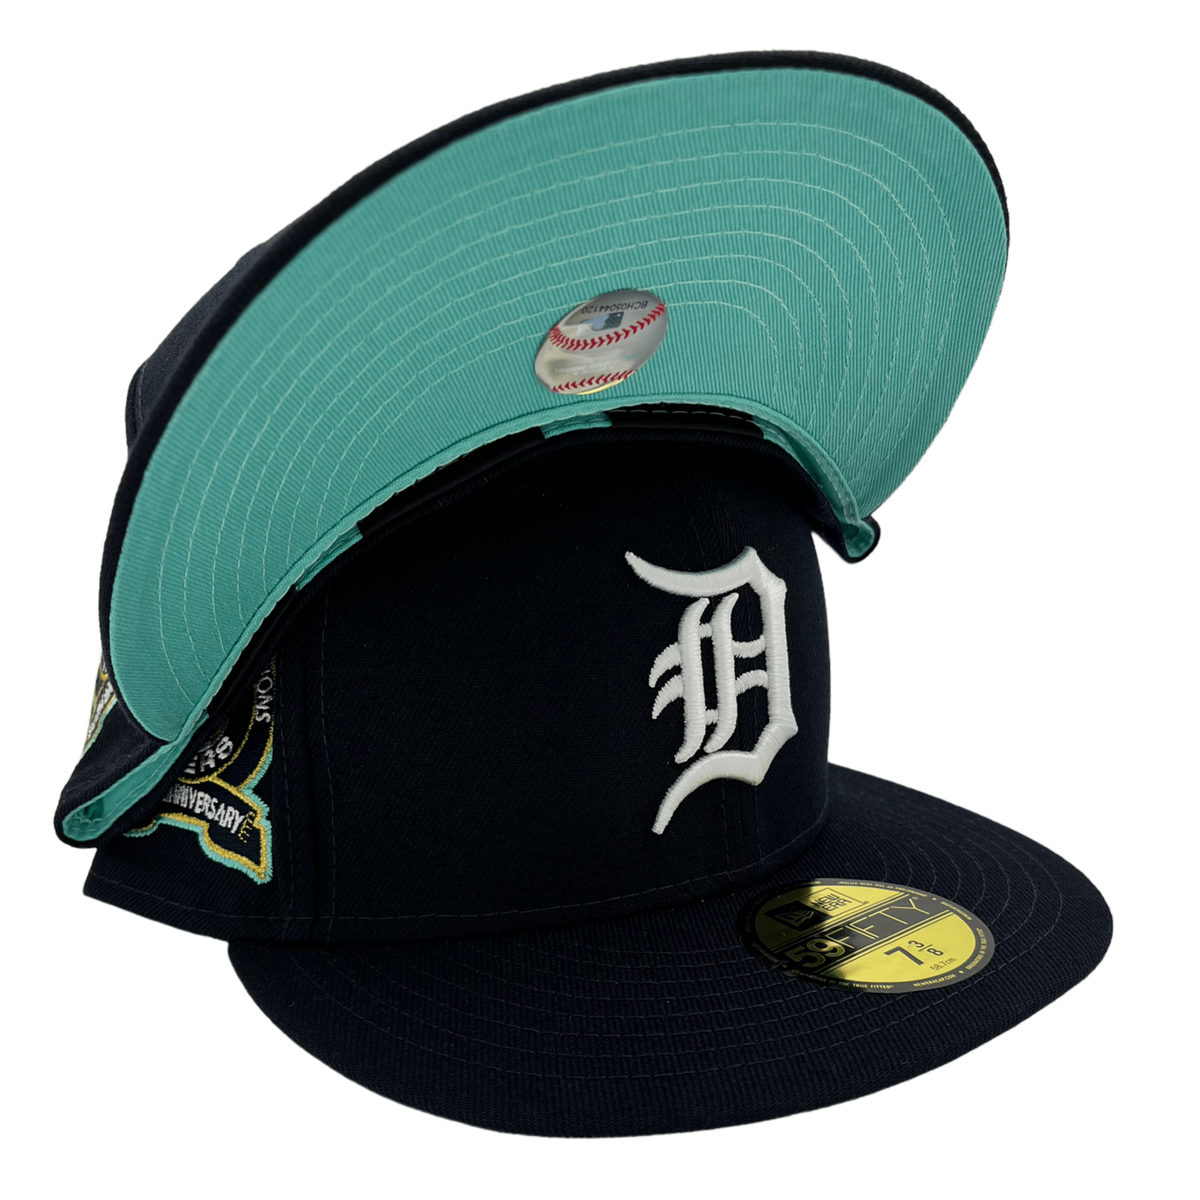 Detroit Tigers New Era Custom 59FIFTY Gray Metallic Suede Patch Fitted Hat, 7 5/8 / Gray